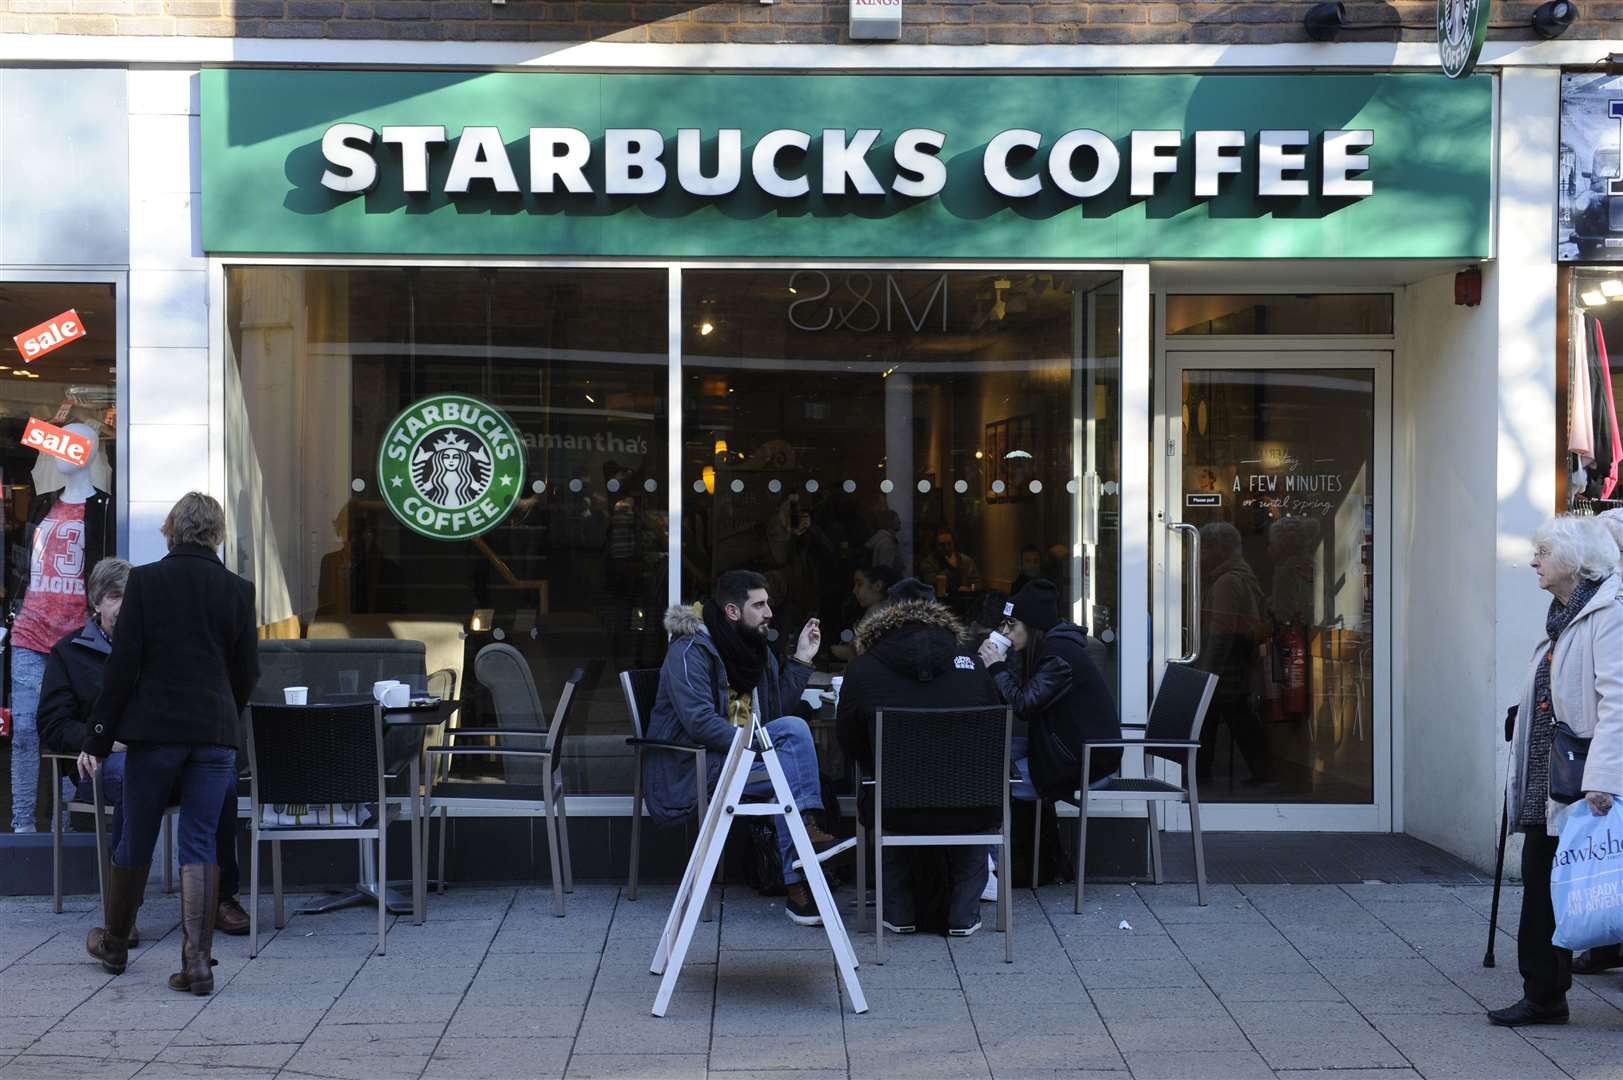 One incident took place at Starbucks in Canterbury